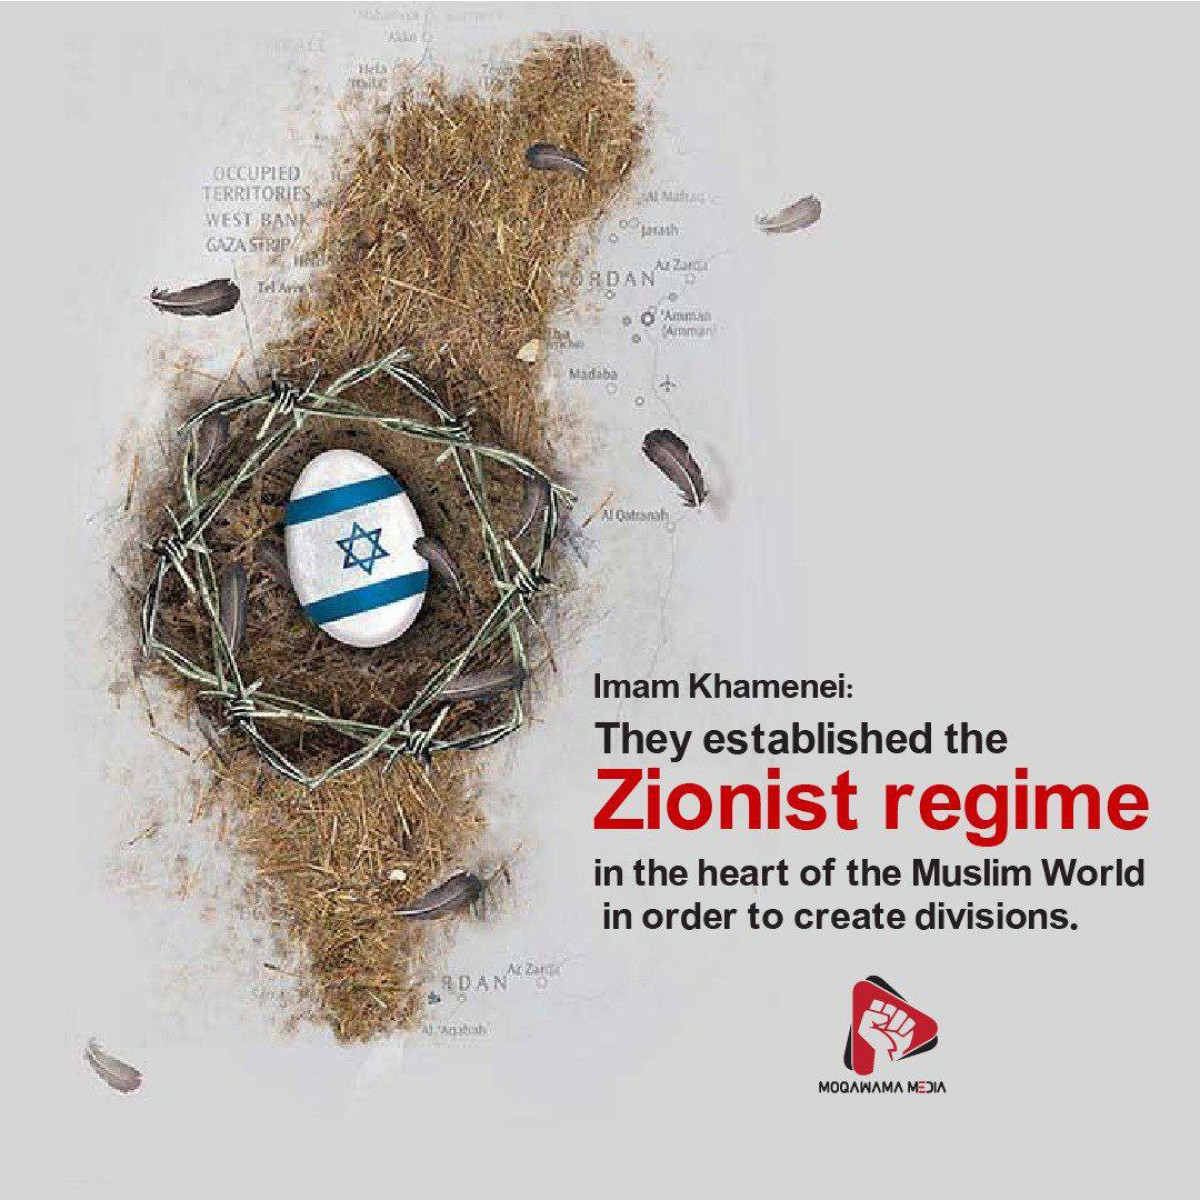 They established the Zionist regime in the heart of the Muslim World in order to create divisions.